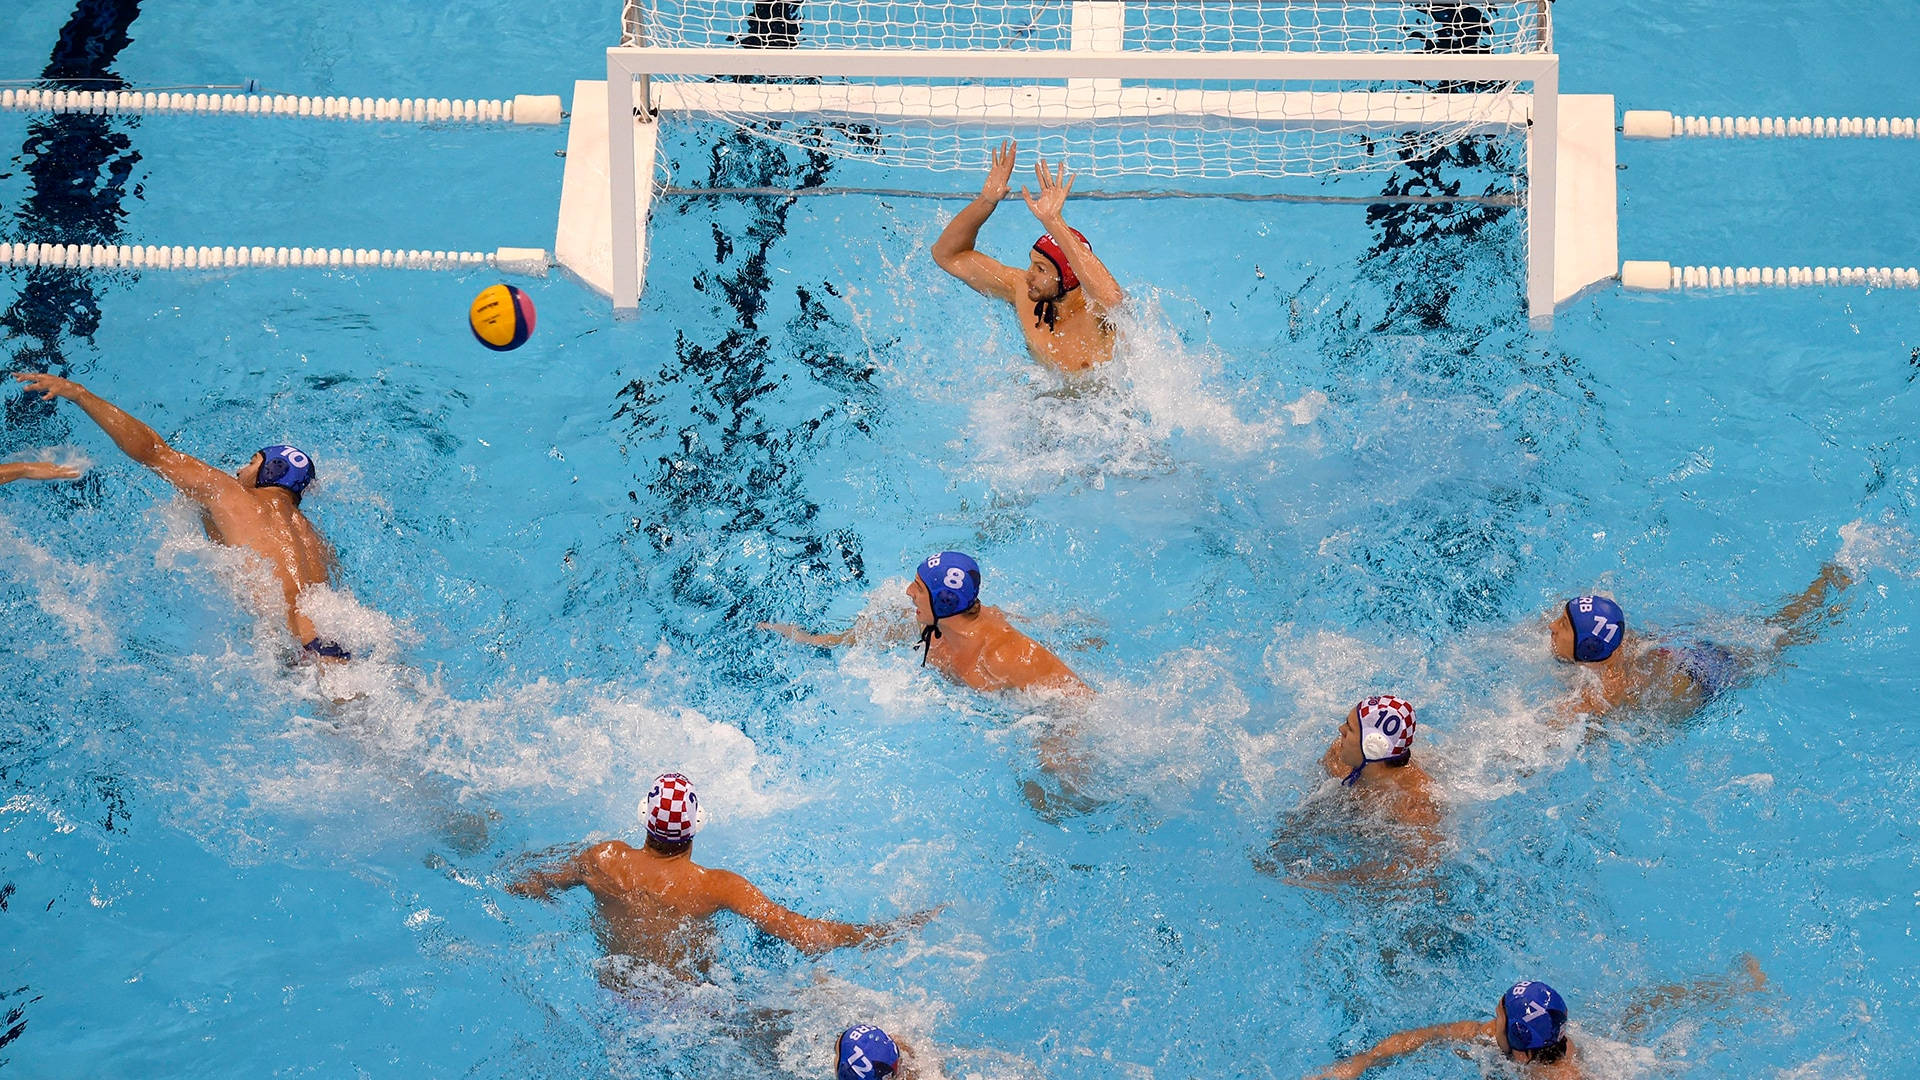 Water Polo Defensive Formation Wallpaper